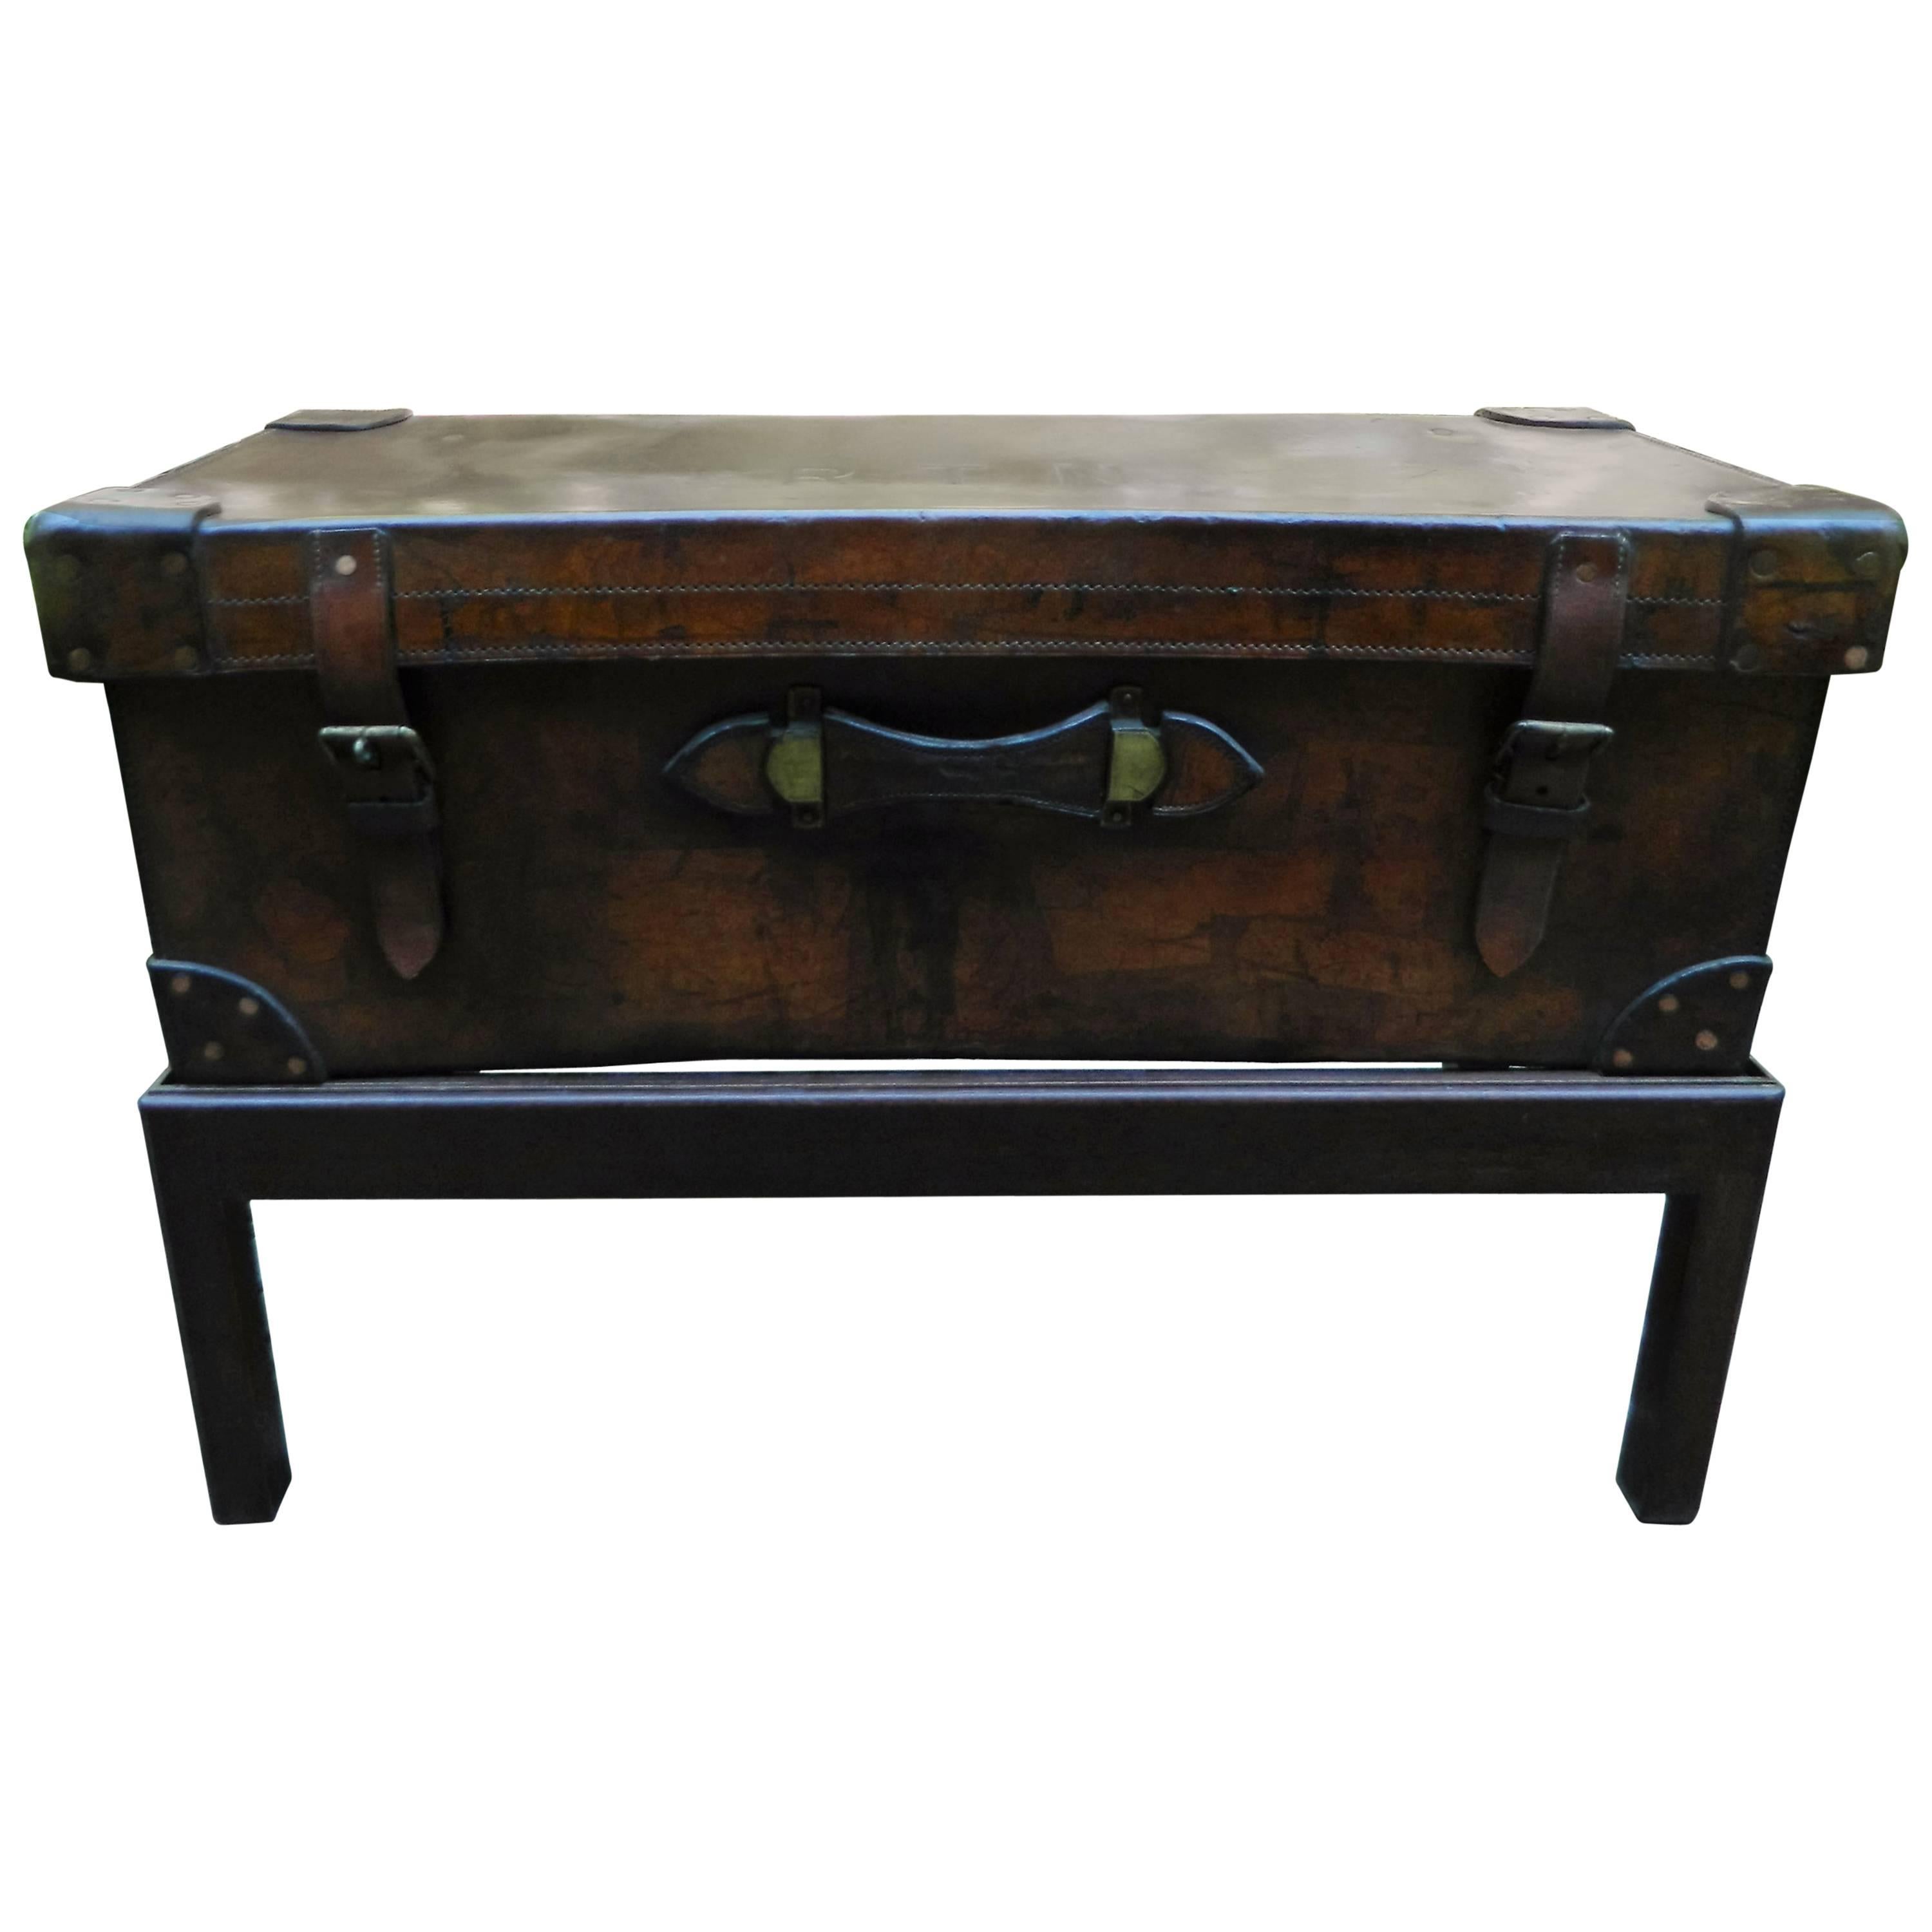 English Leather Trunk Adapted as a Coffee Table on a Wood Base, 19th Century